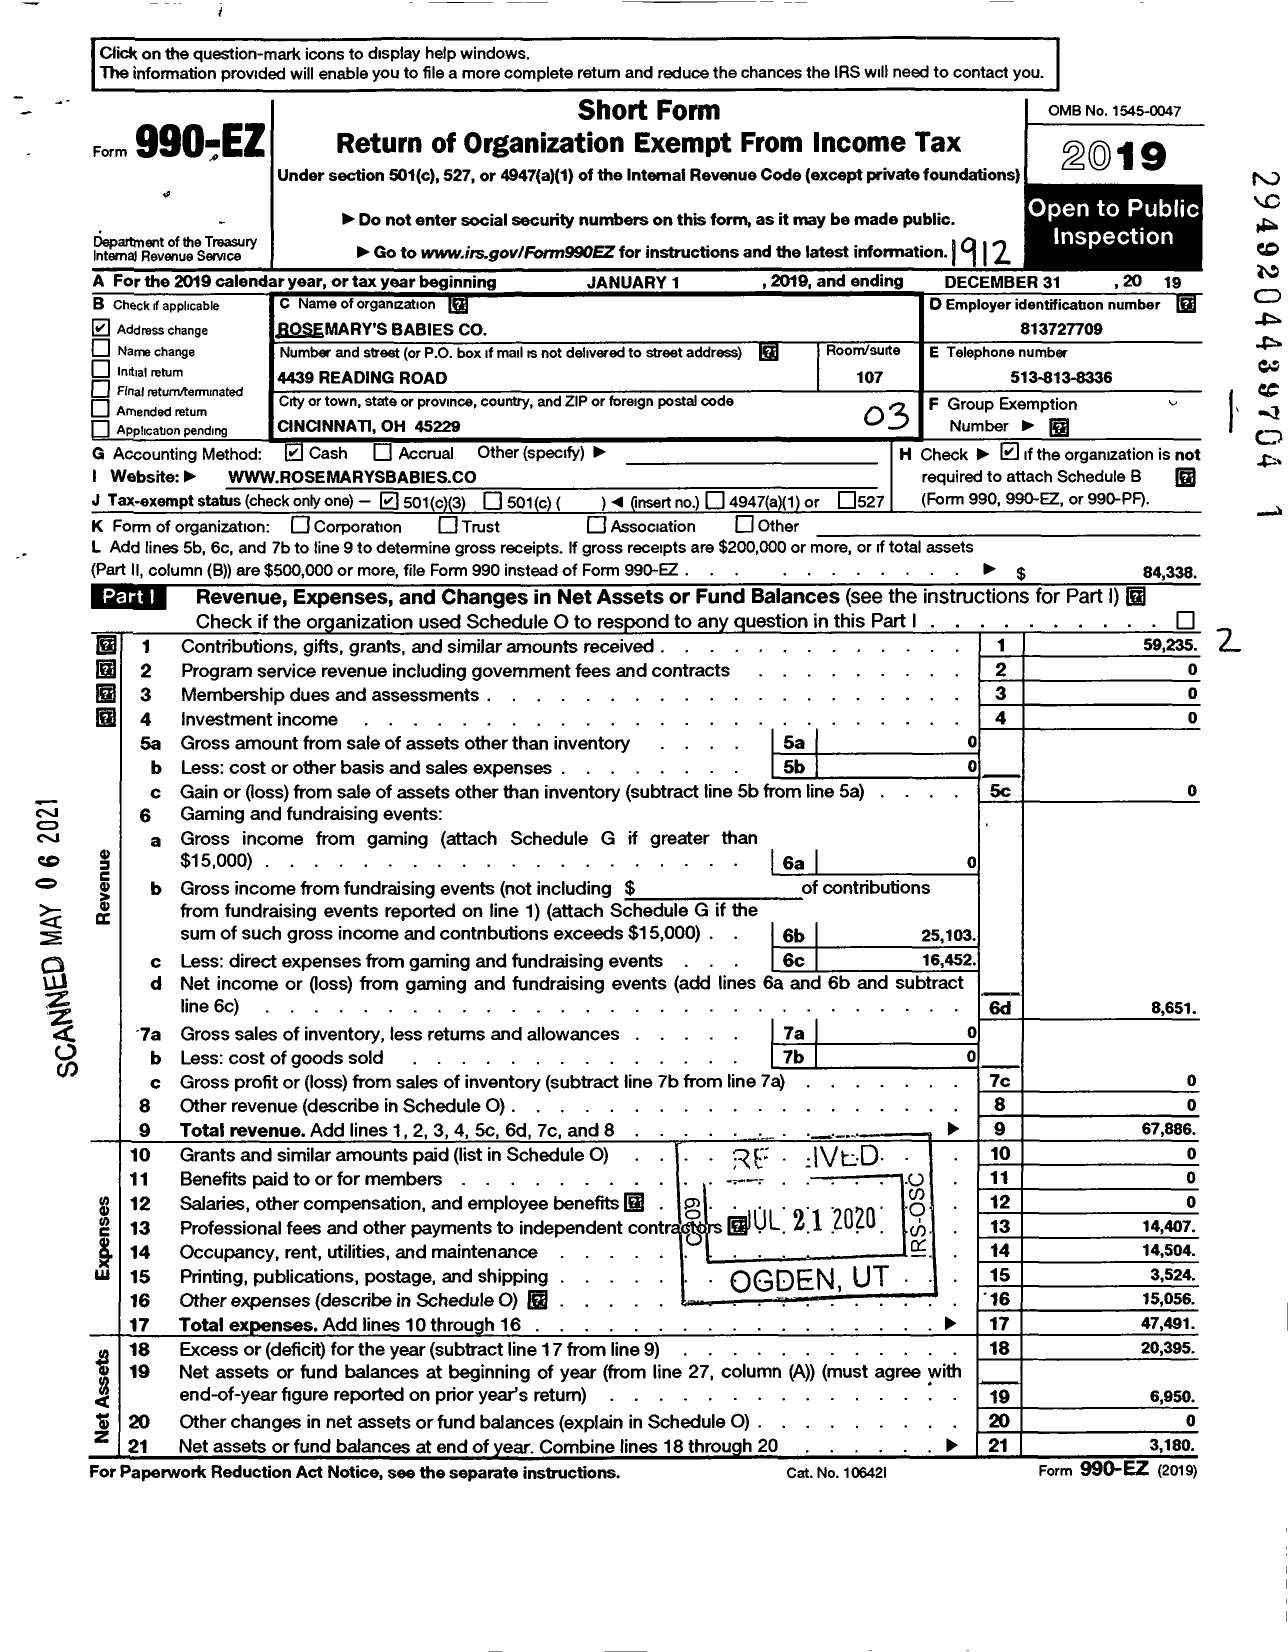 Image of first page of 2019 Form 990EZ for Rosemary's Babies Co